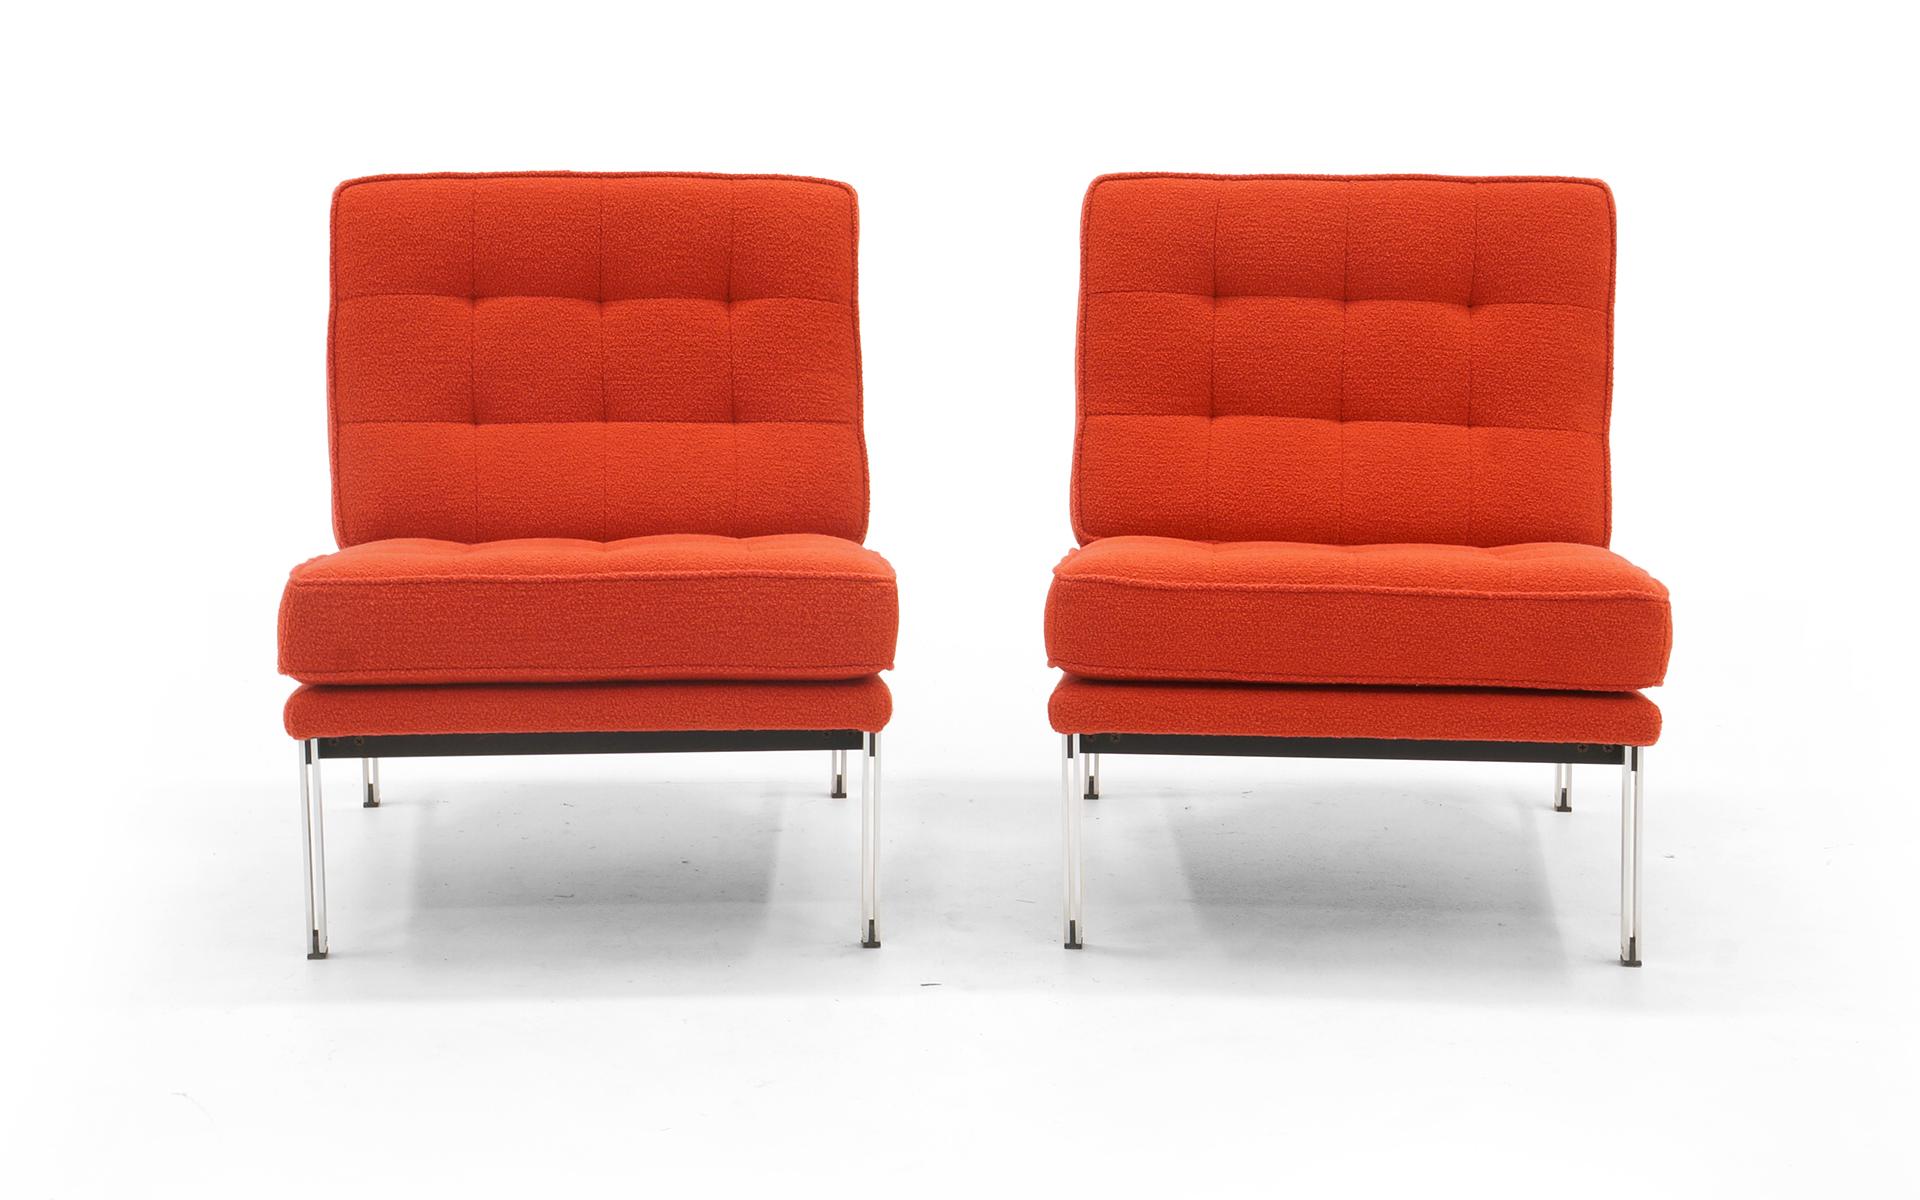 Pair of armless lounge chairs design by Florence Knoll for the Parallel Bar Series for Knoll. These have been expertly reupholstered in crimson Knoll classic boucle. The chromed steel frames date from the 1960s.